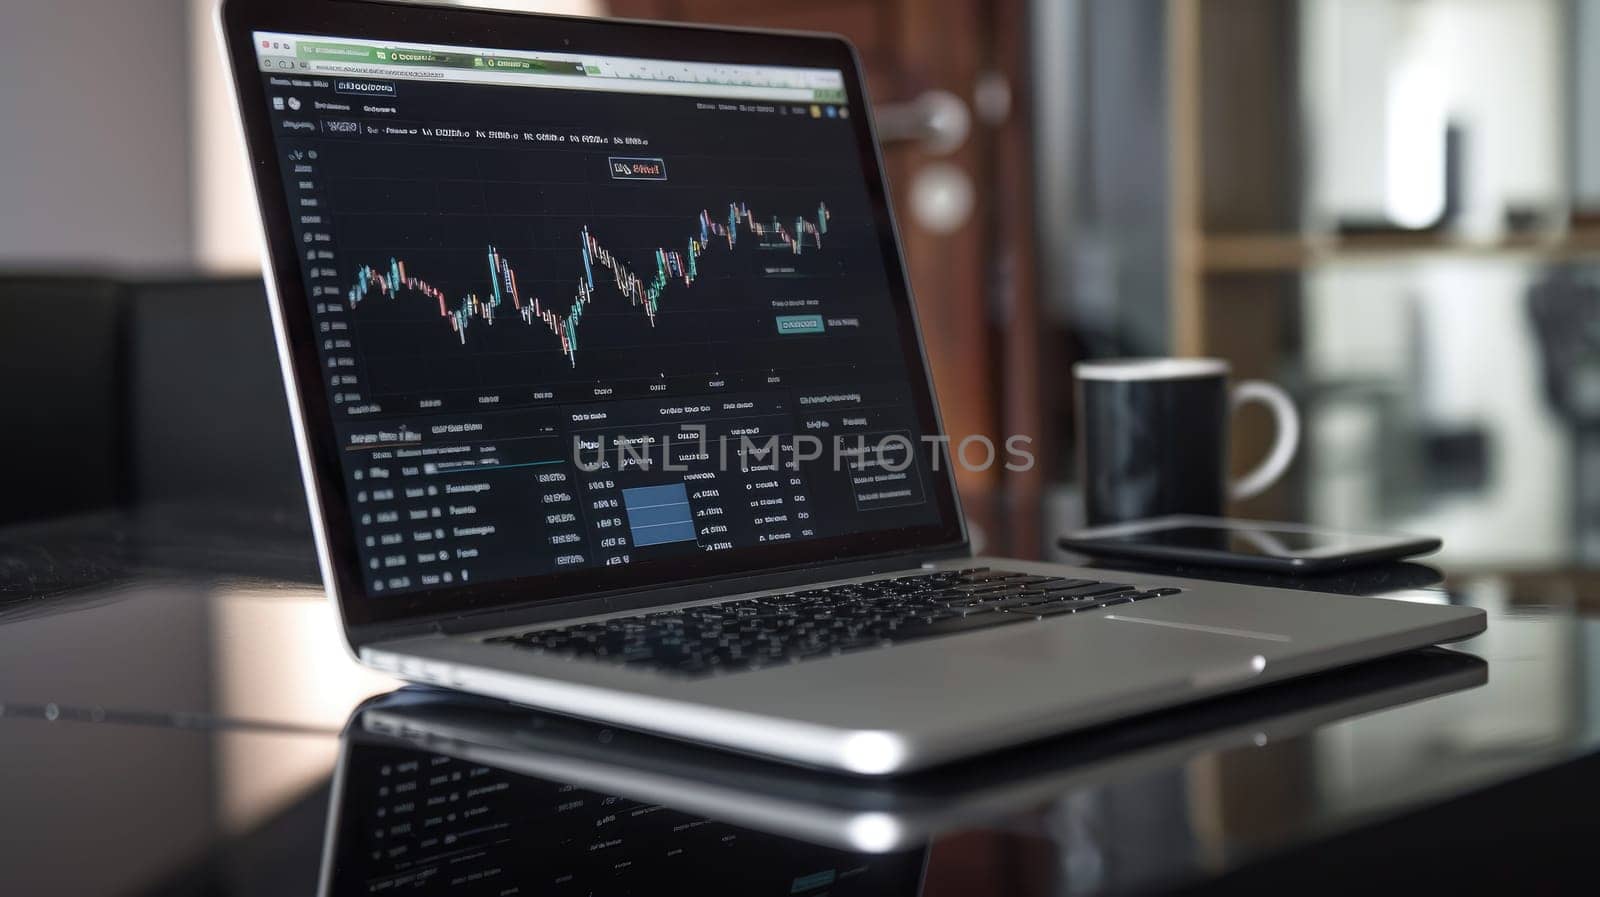 A laptop computer is open to a screen displaying a stock market graph. A cup of coffee is sitting on the desk next to the laptop